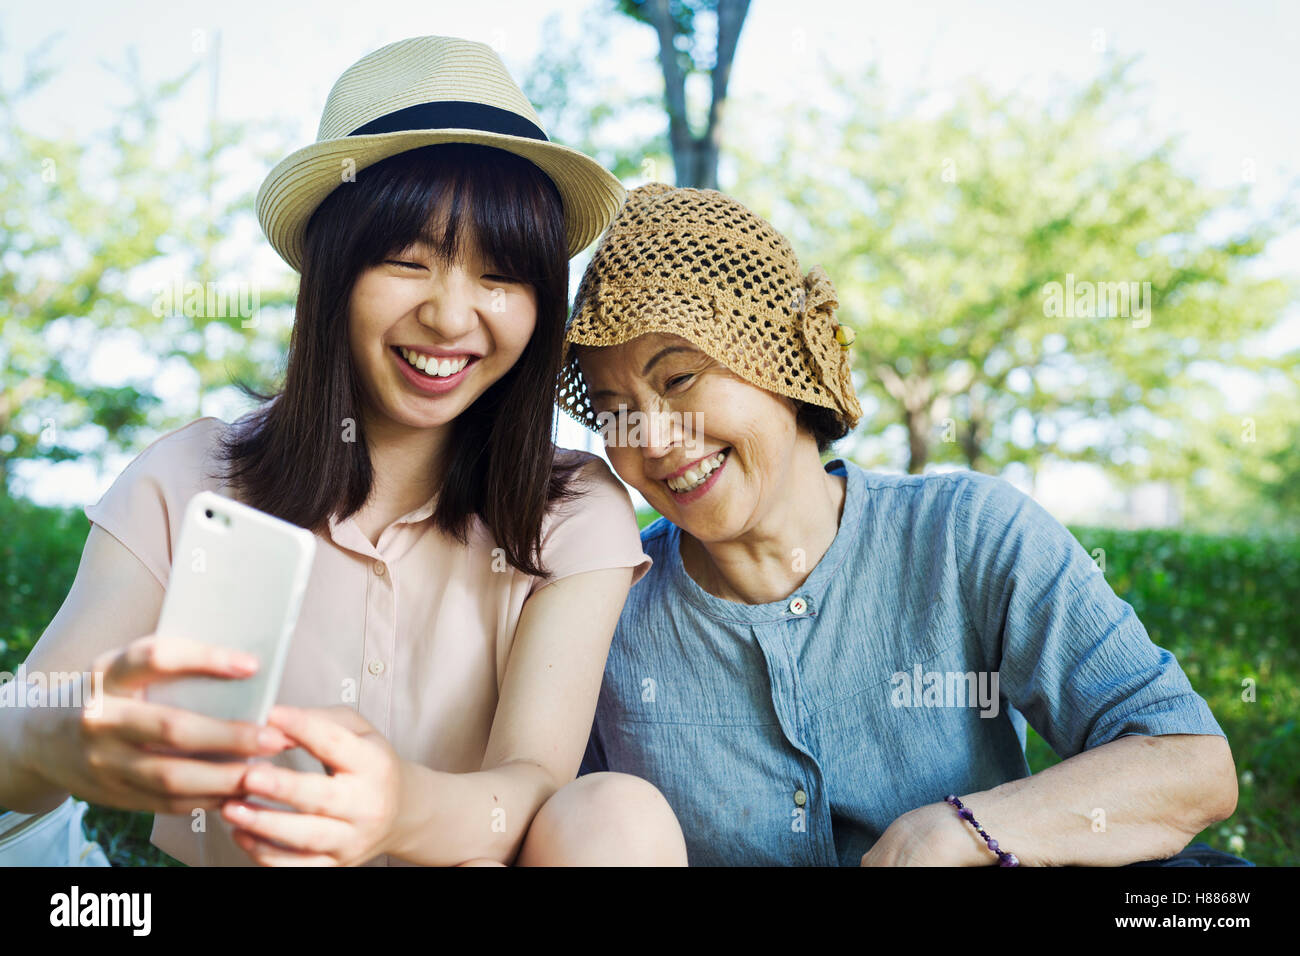 Portrait of a smiling senior woman wearing a crochet hat and a young woman wearing a panama hat. Stock Photo